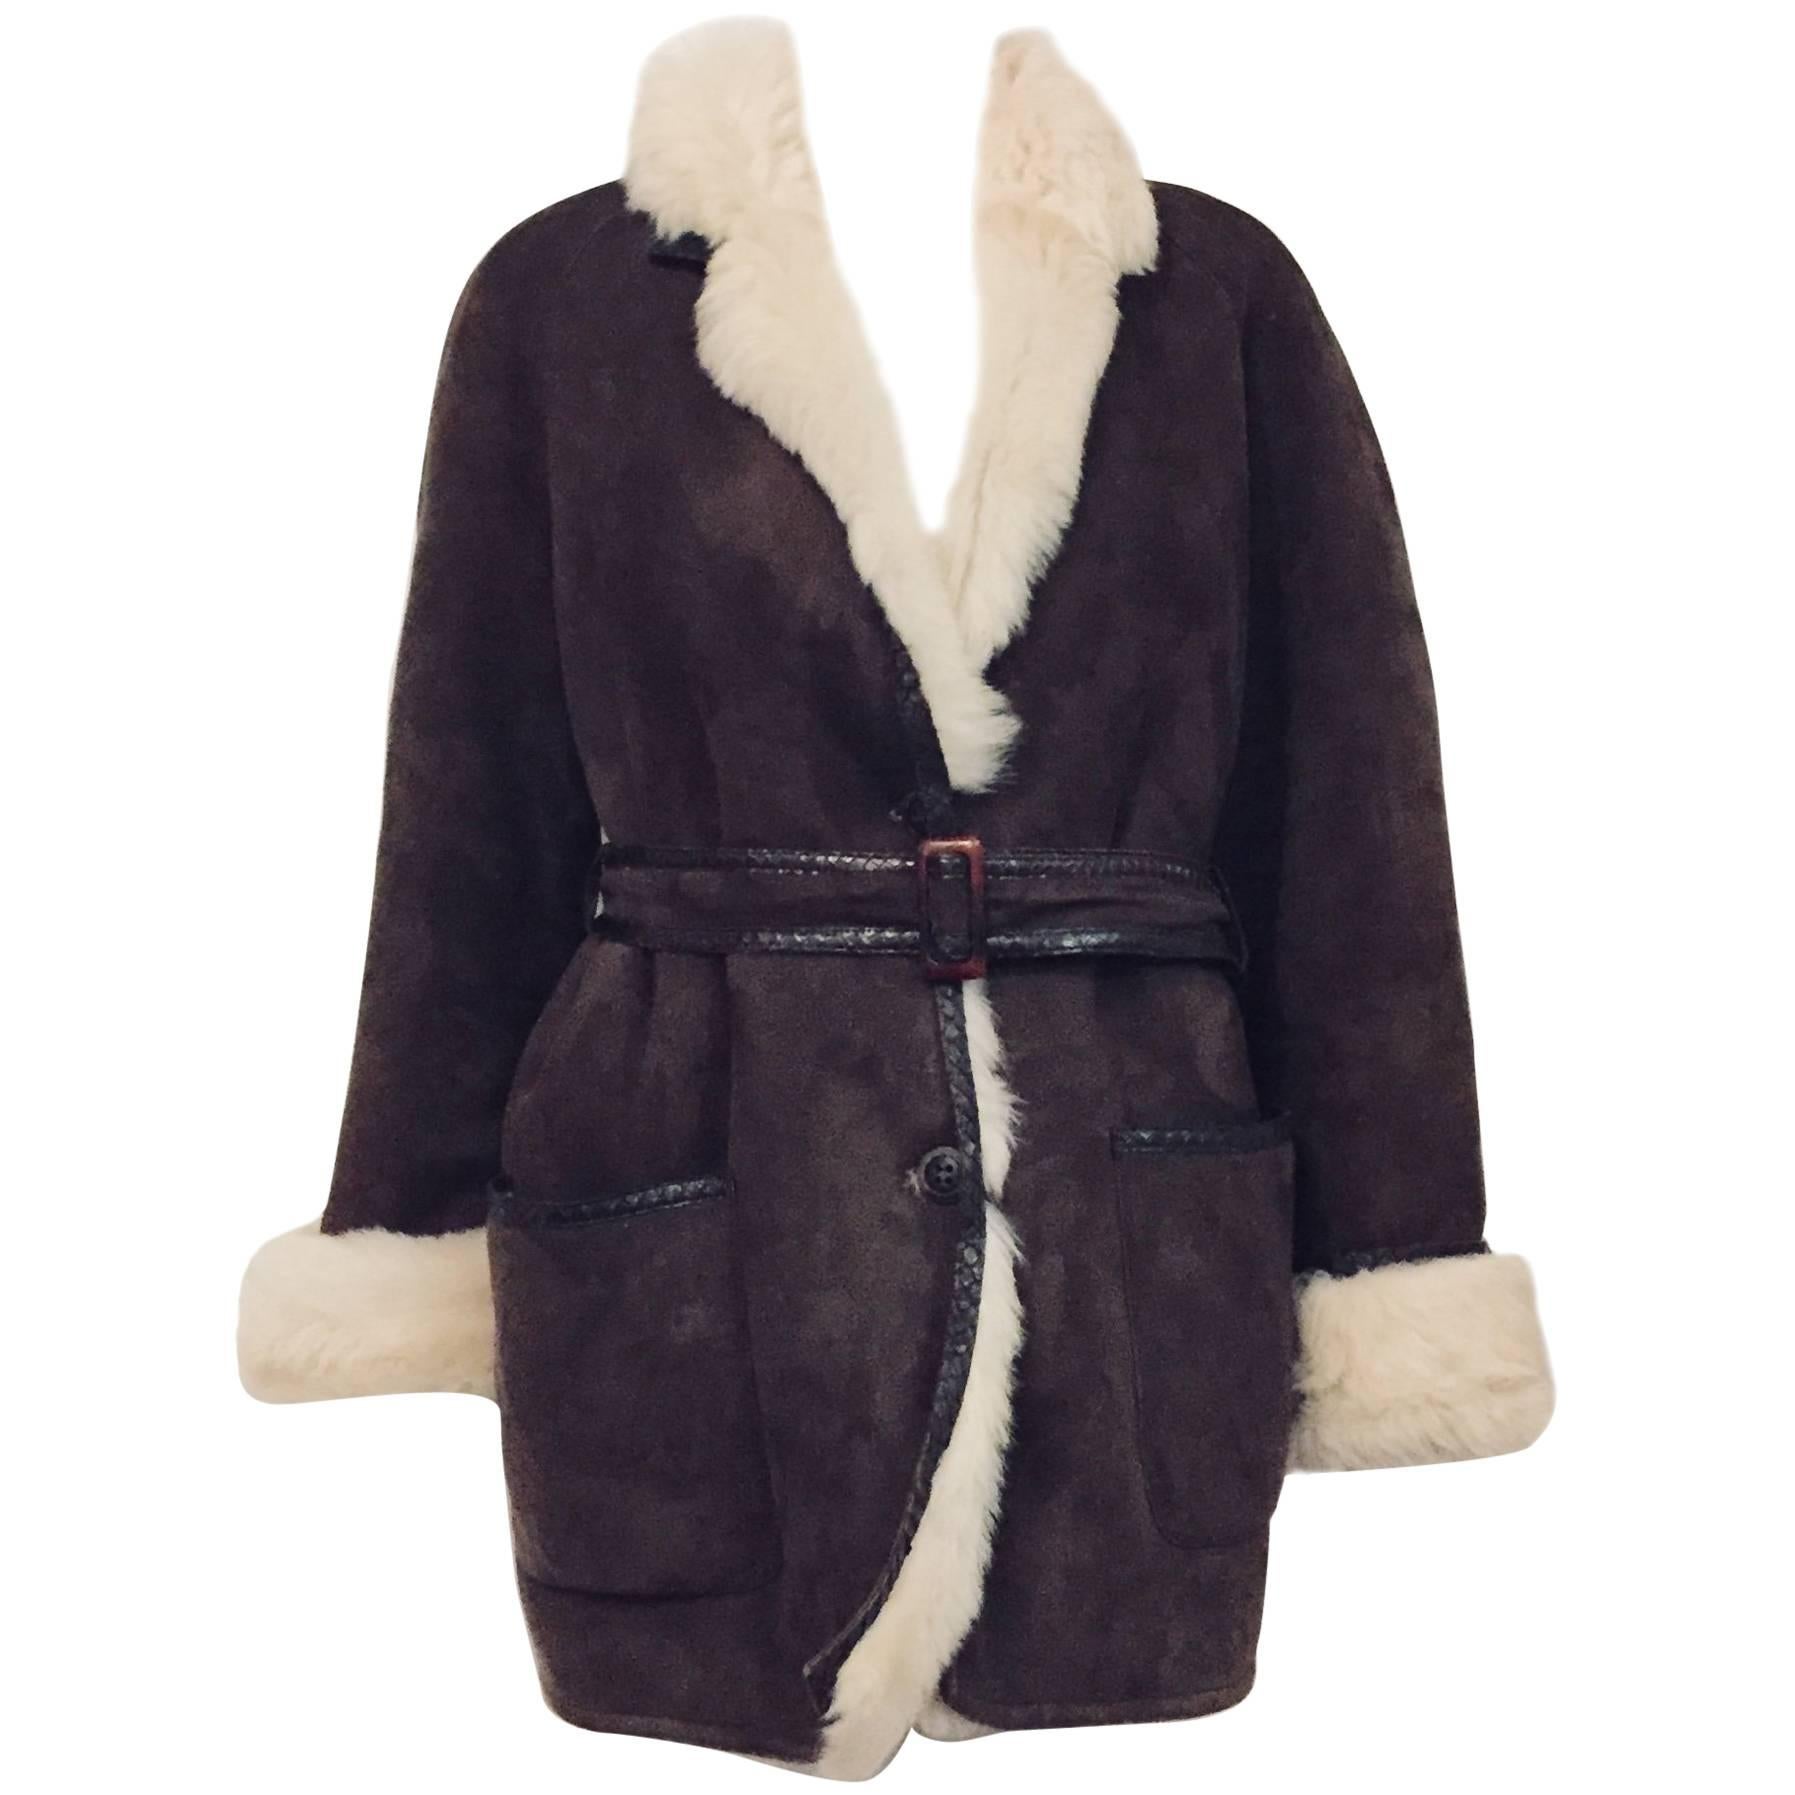 Italian Chocolate Shearling Coat with Belt and Python Trim